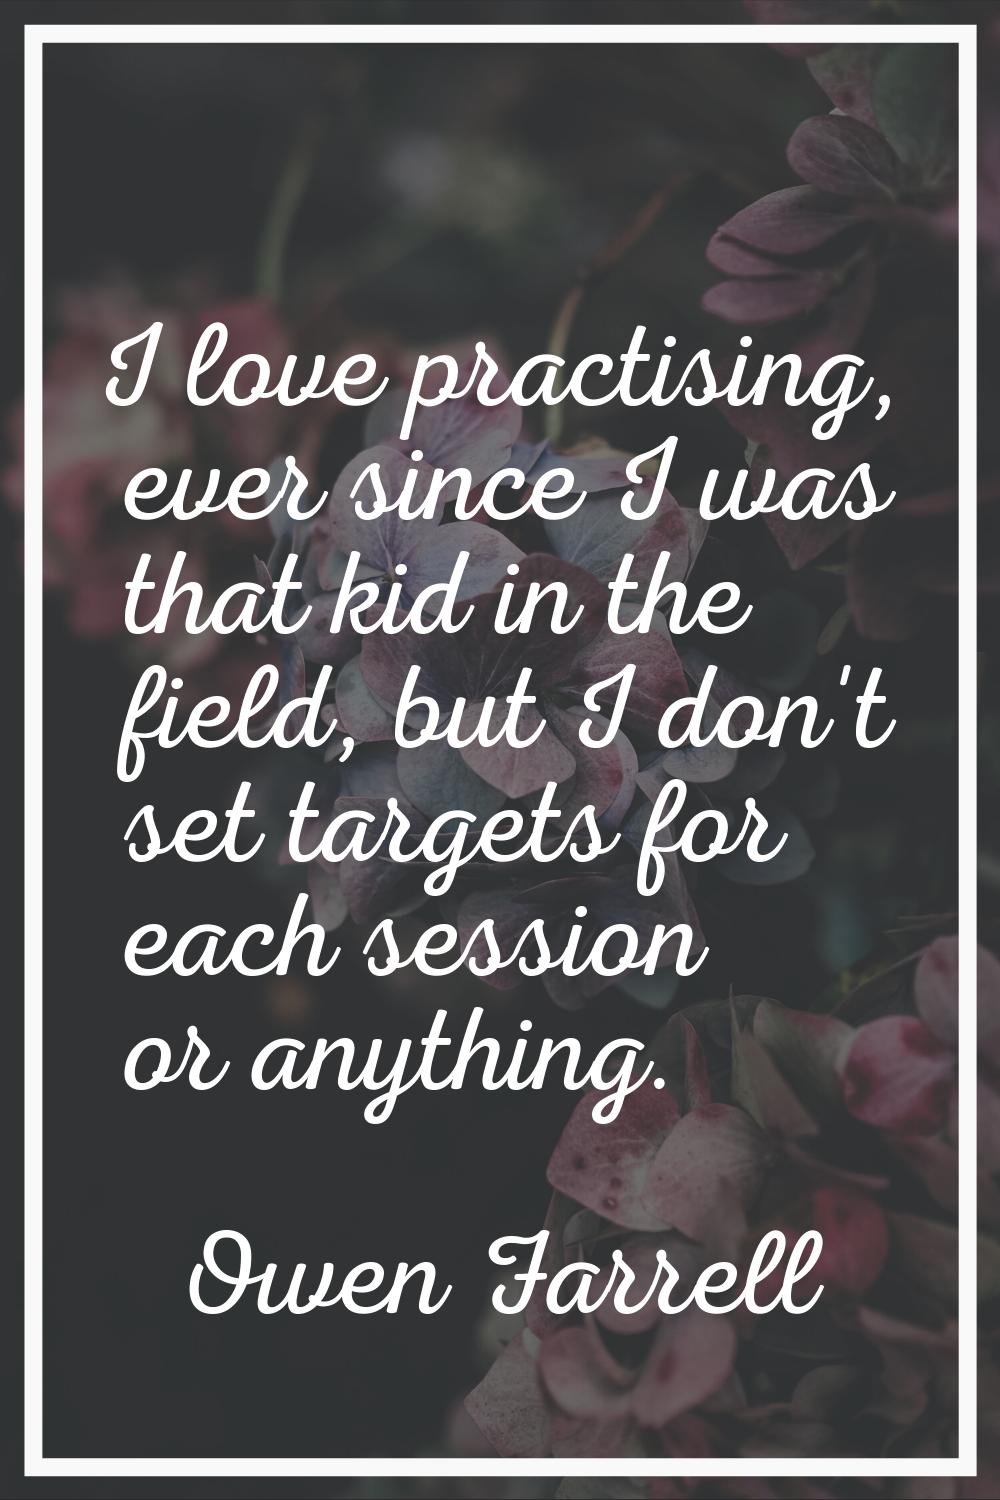 I love practising, ever since I was that kid in the field, but I don't set targets for each session